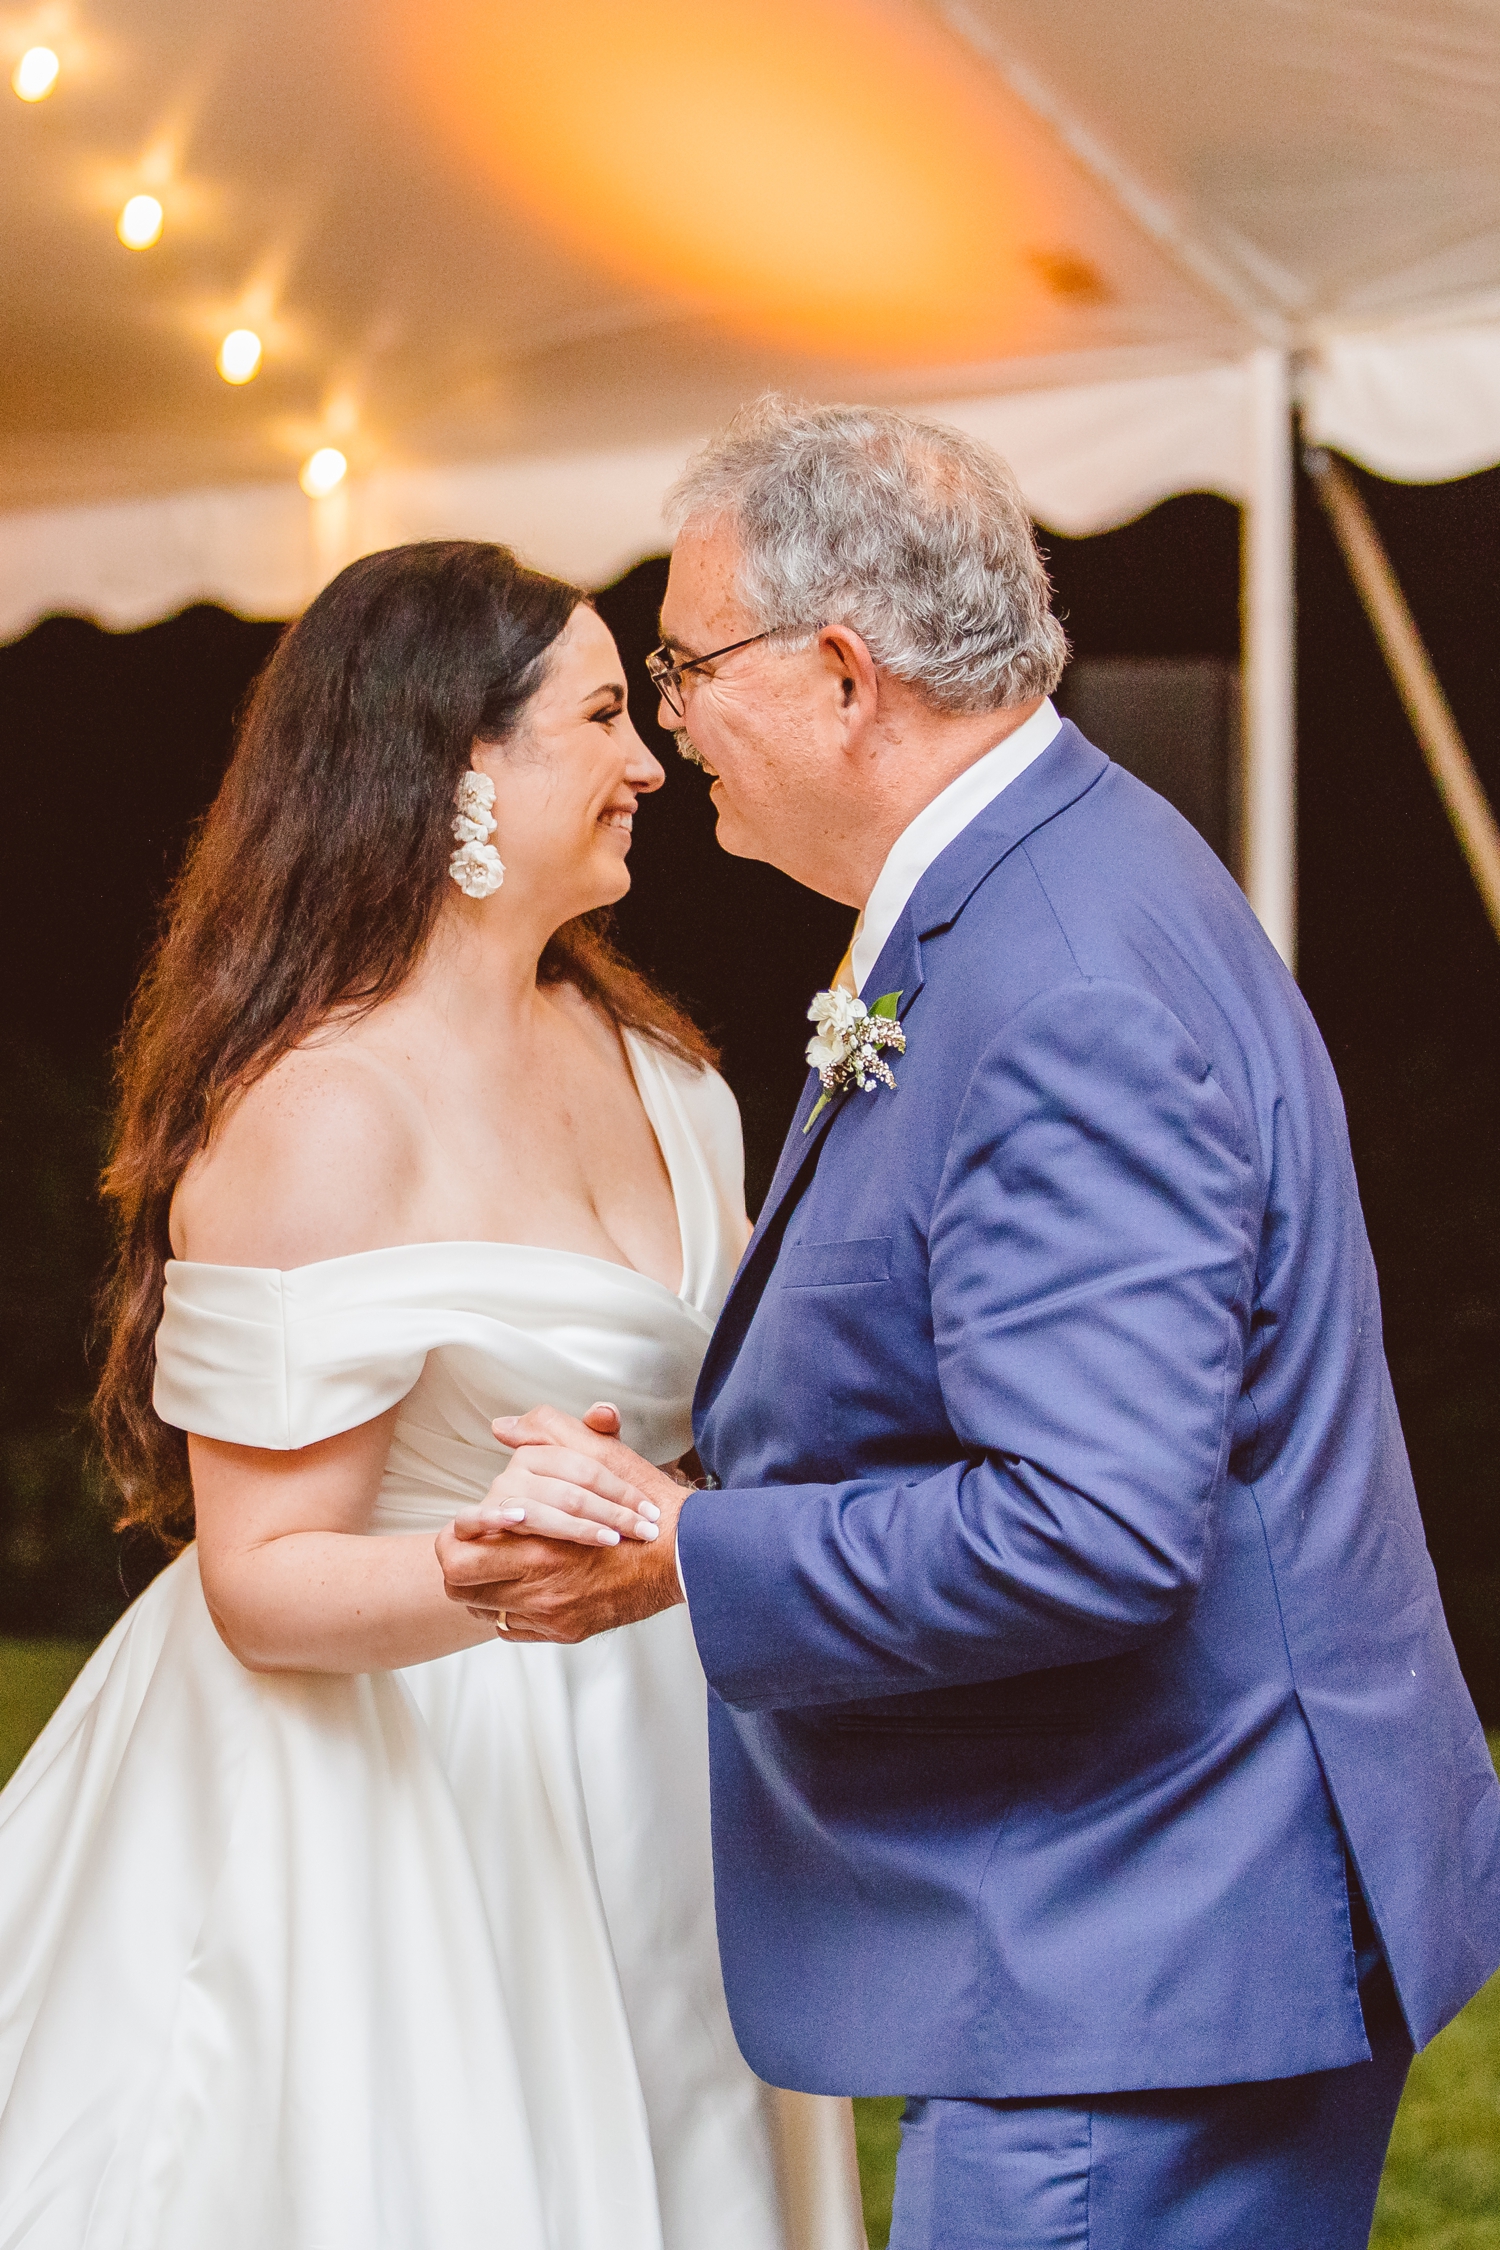 Bride dancing with father at Ladew Topiary Garden's wedding | Brooke Michelle Photo